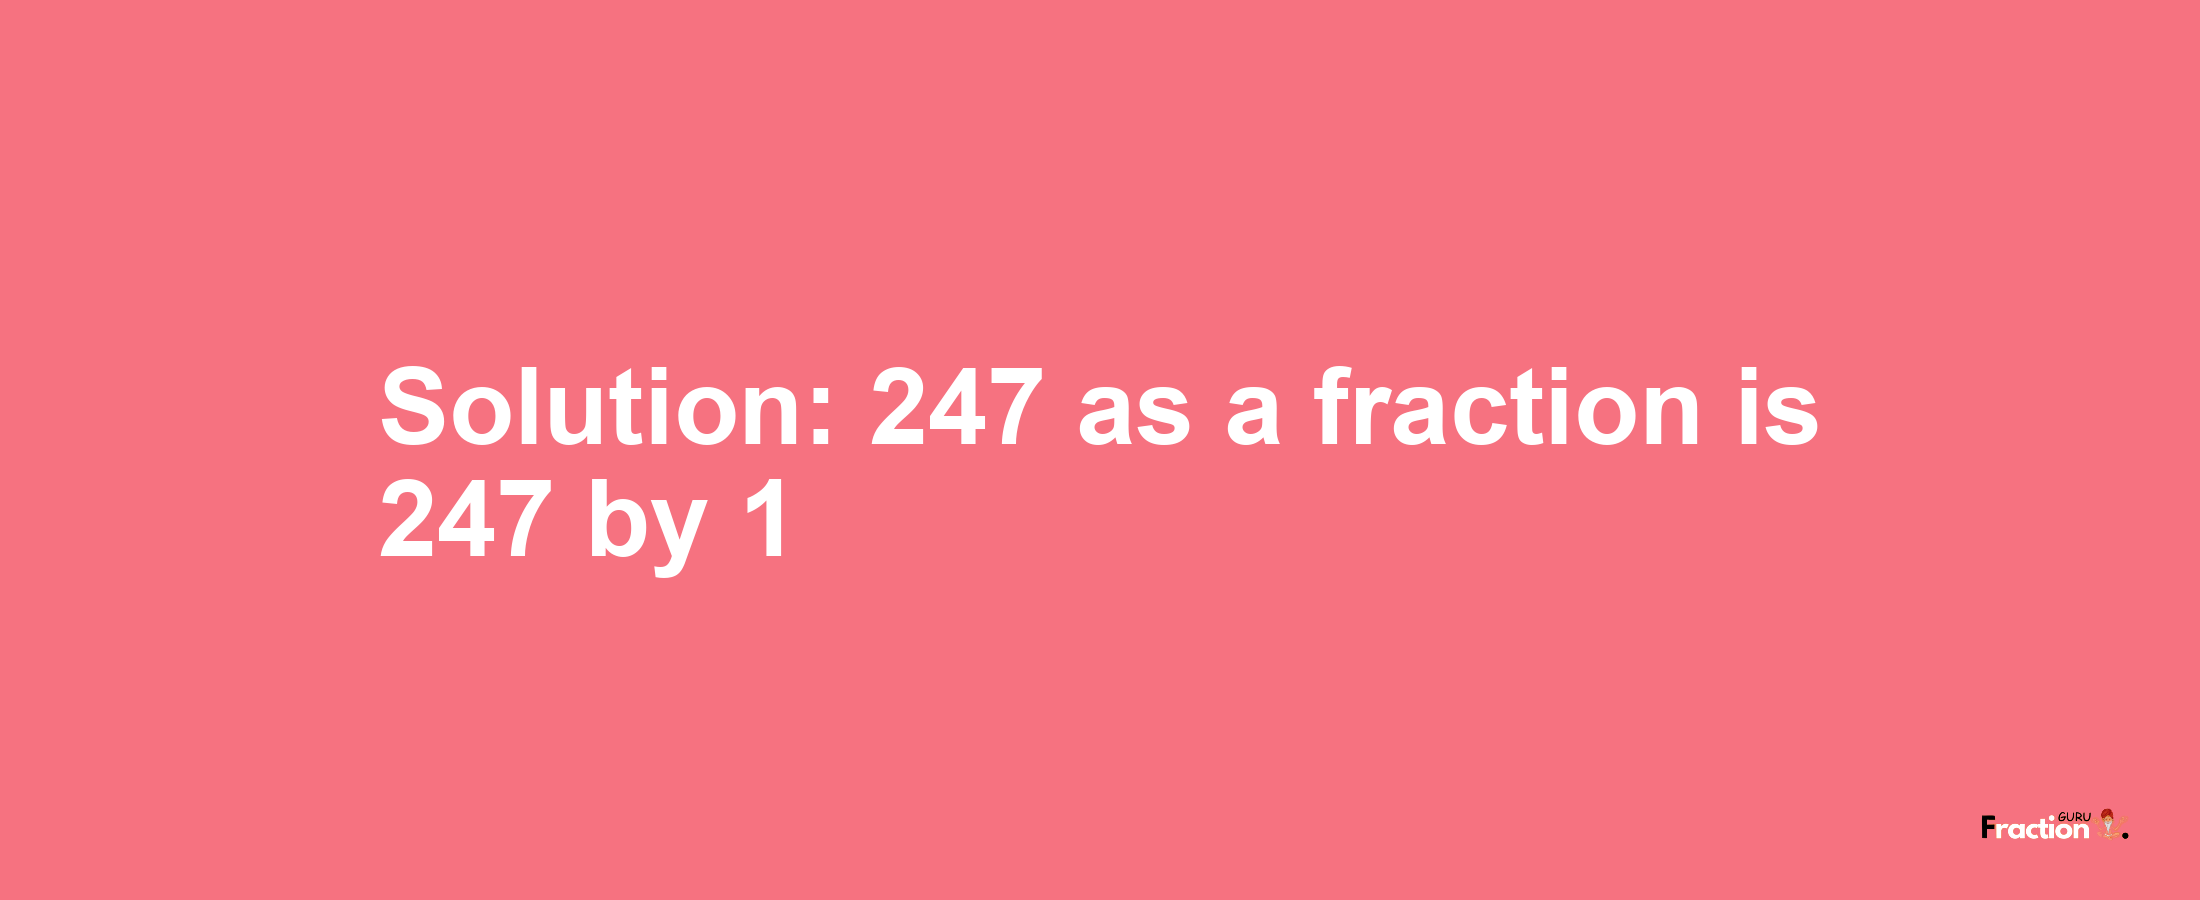 Solution:247 as a fraction is 247/1